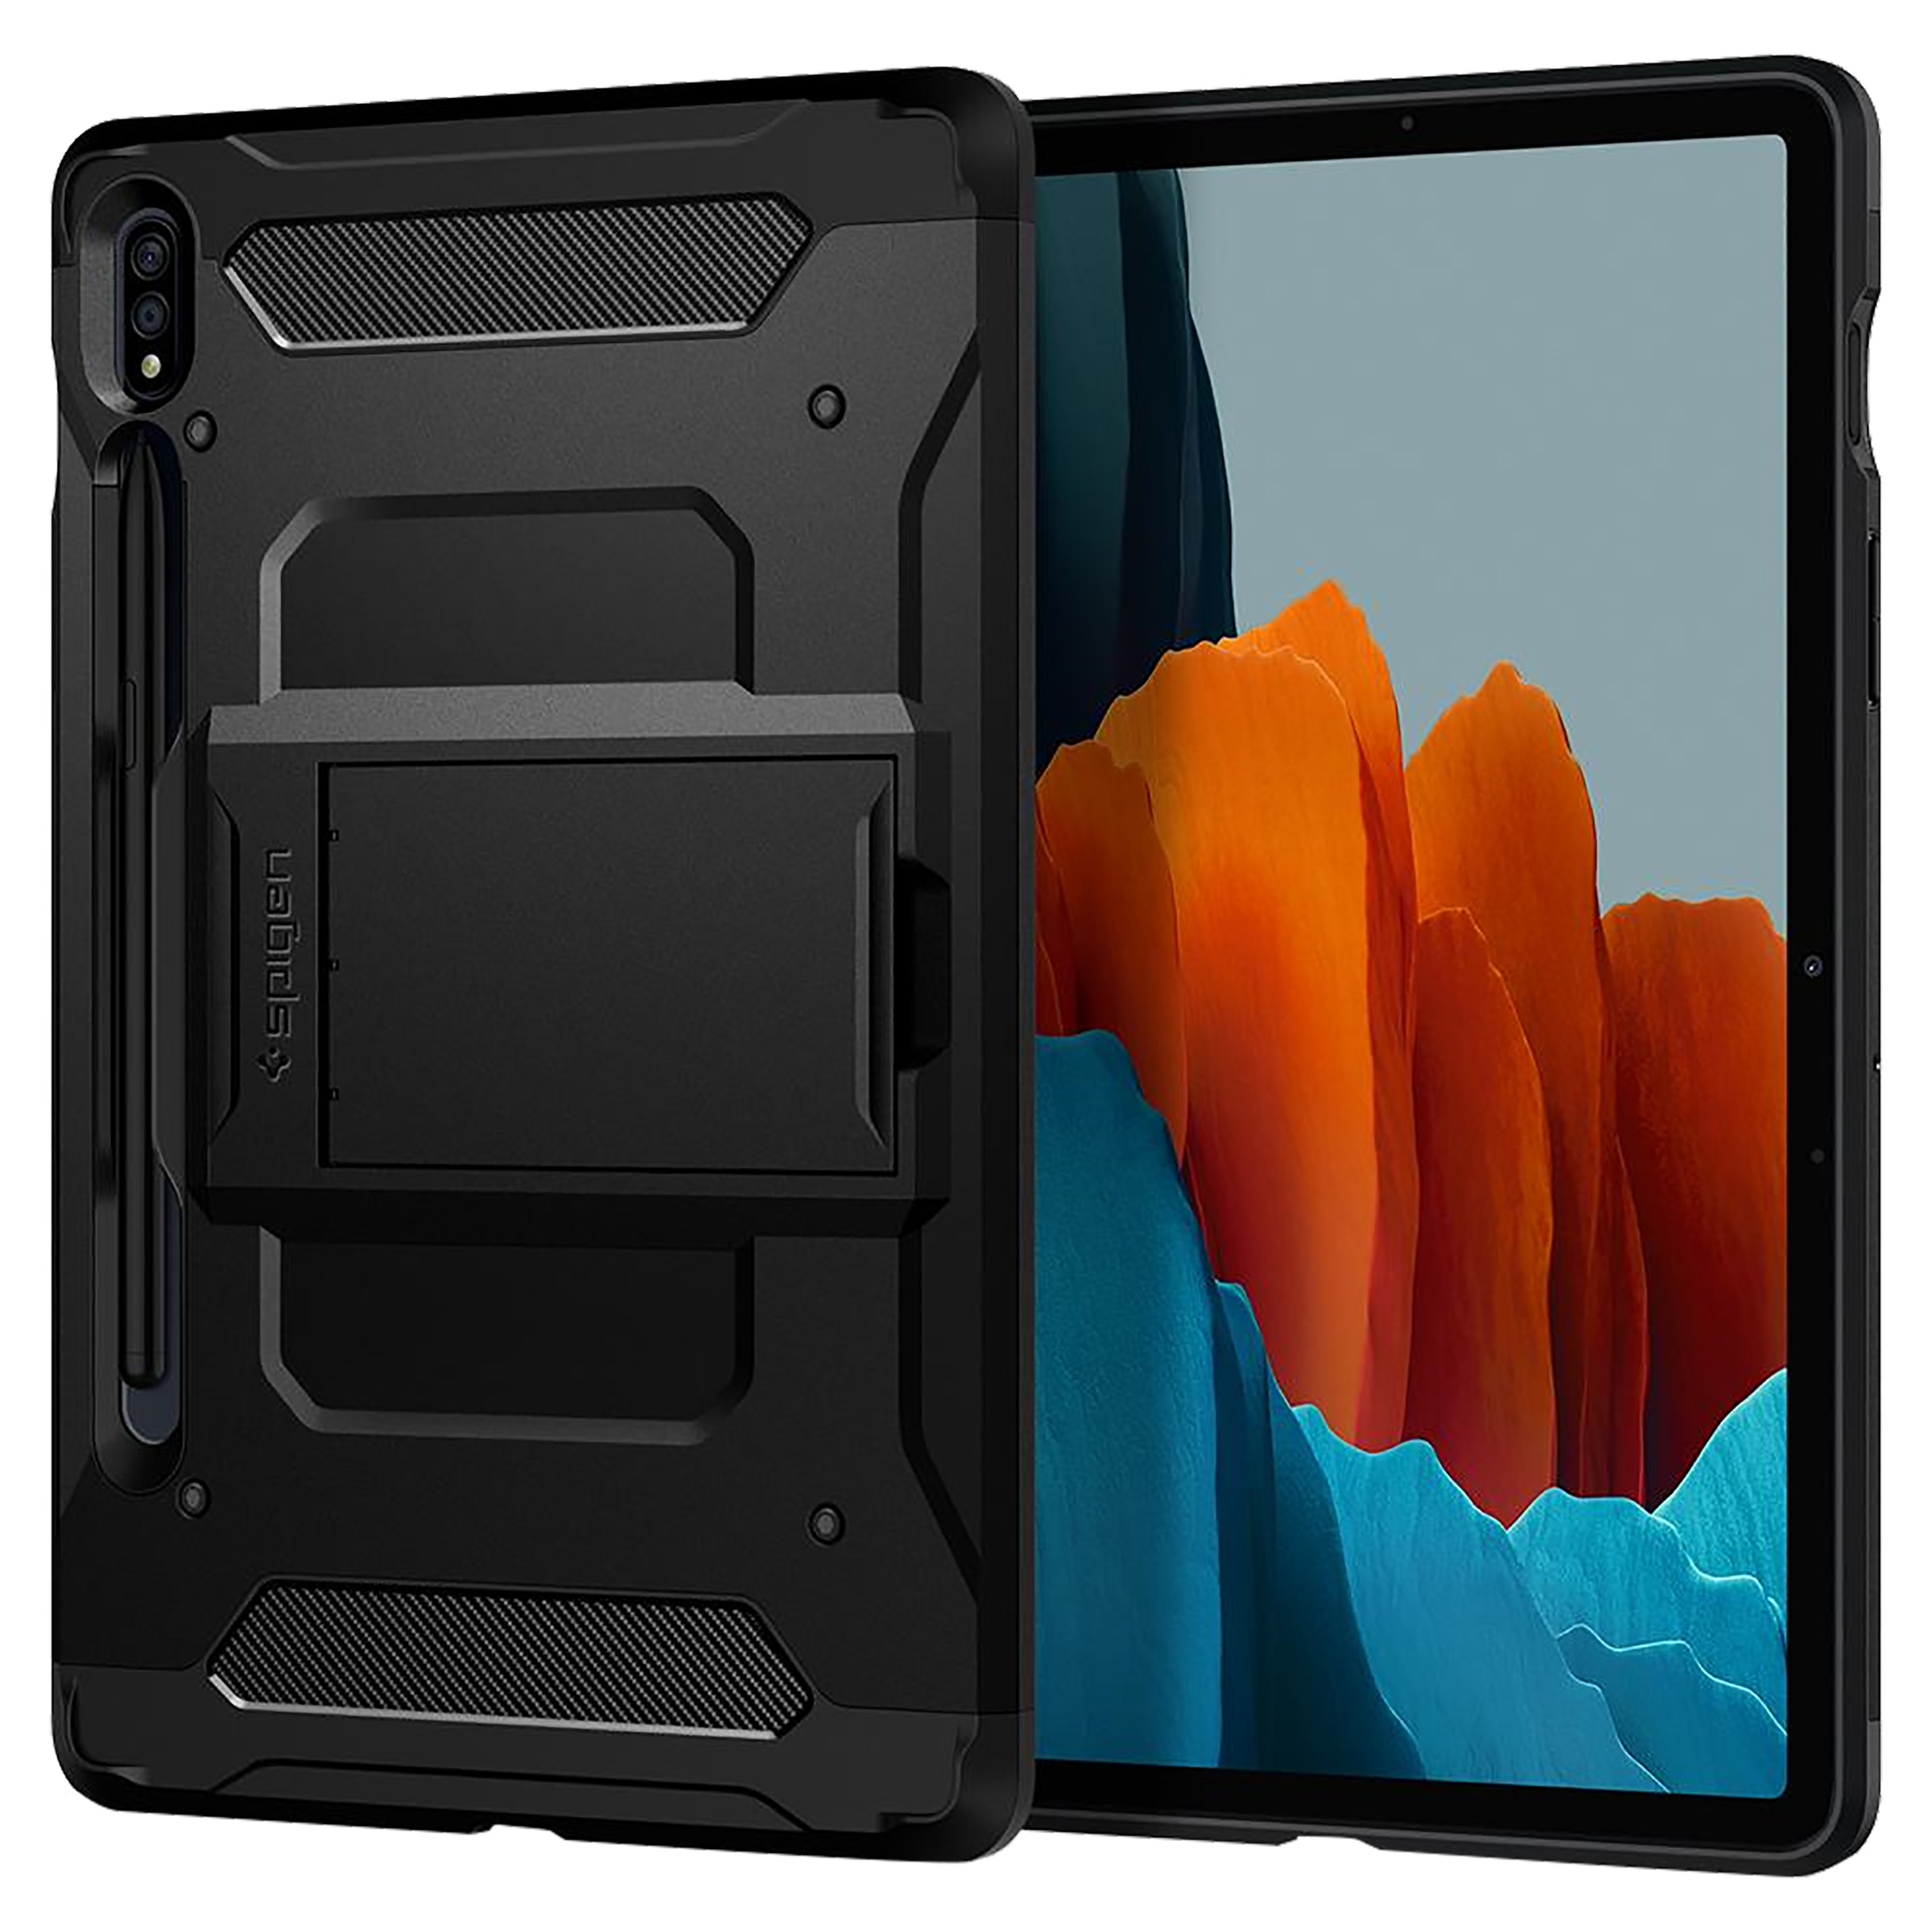 spigen Tough Armor Pro TPU & Polycarbonate Back Cover for SAMSUNG Galaxy Tab S8, Tab S7 (Built-In Pen Storage, Black)